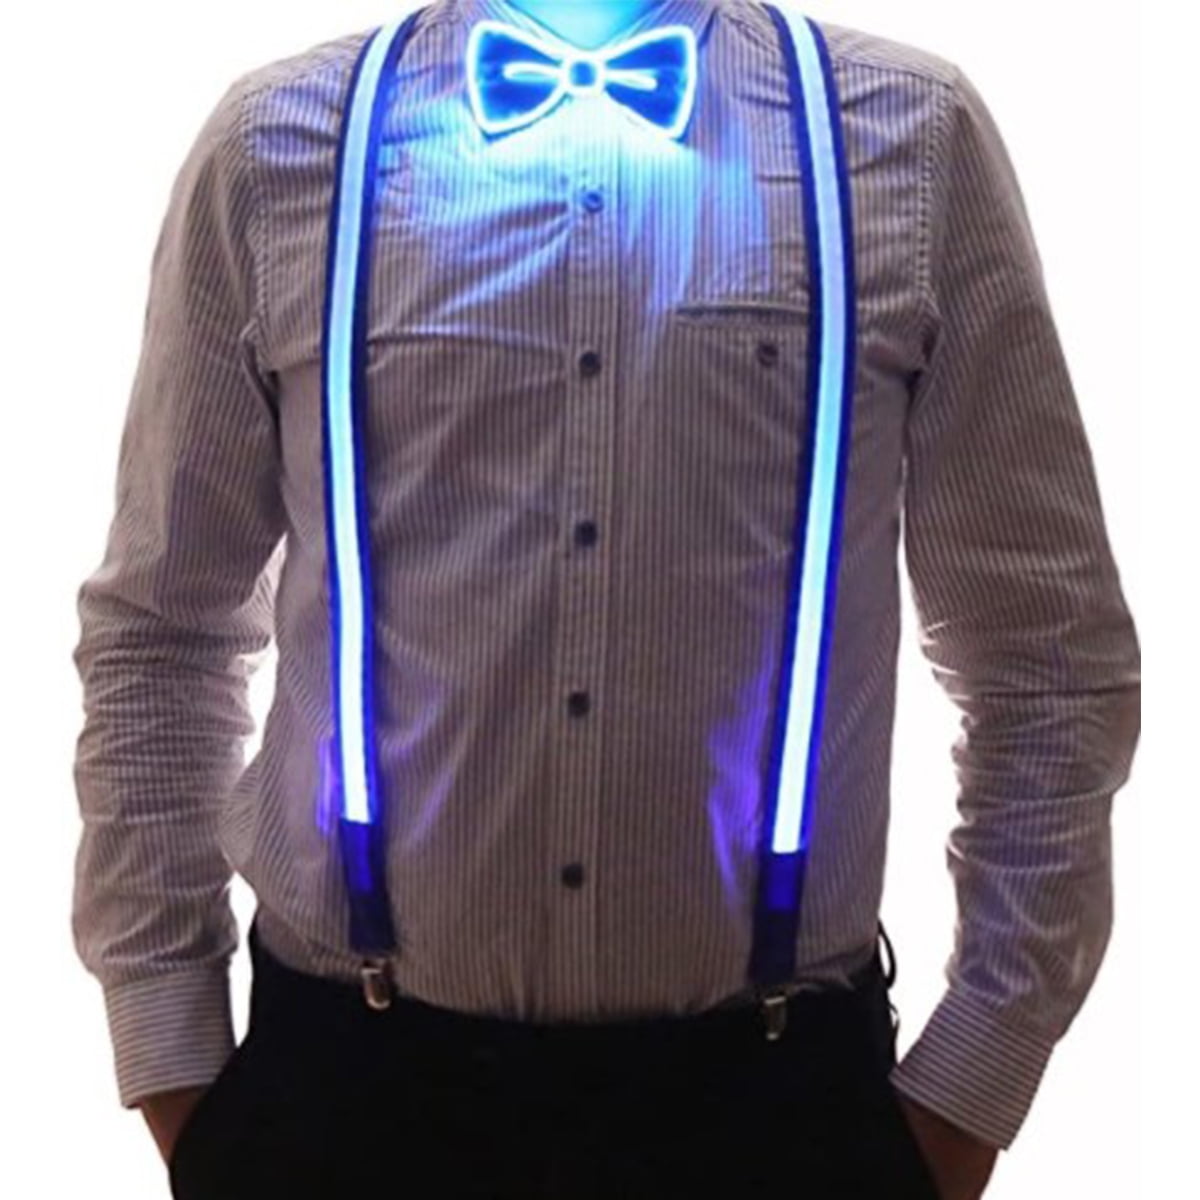 Eummy LED Suspender Glow in the Dark Trouser Braces Light Up Y-shaped  Trousers Strap Adjustable and Elastic Illuminated Suspender for Women Men